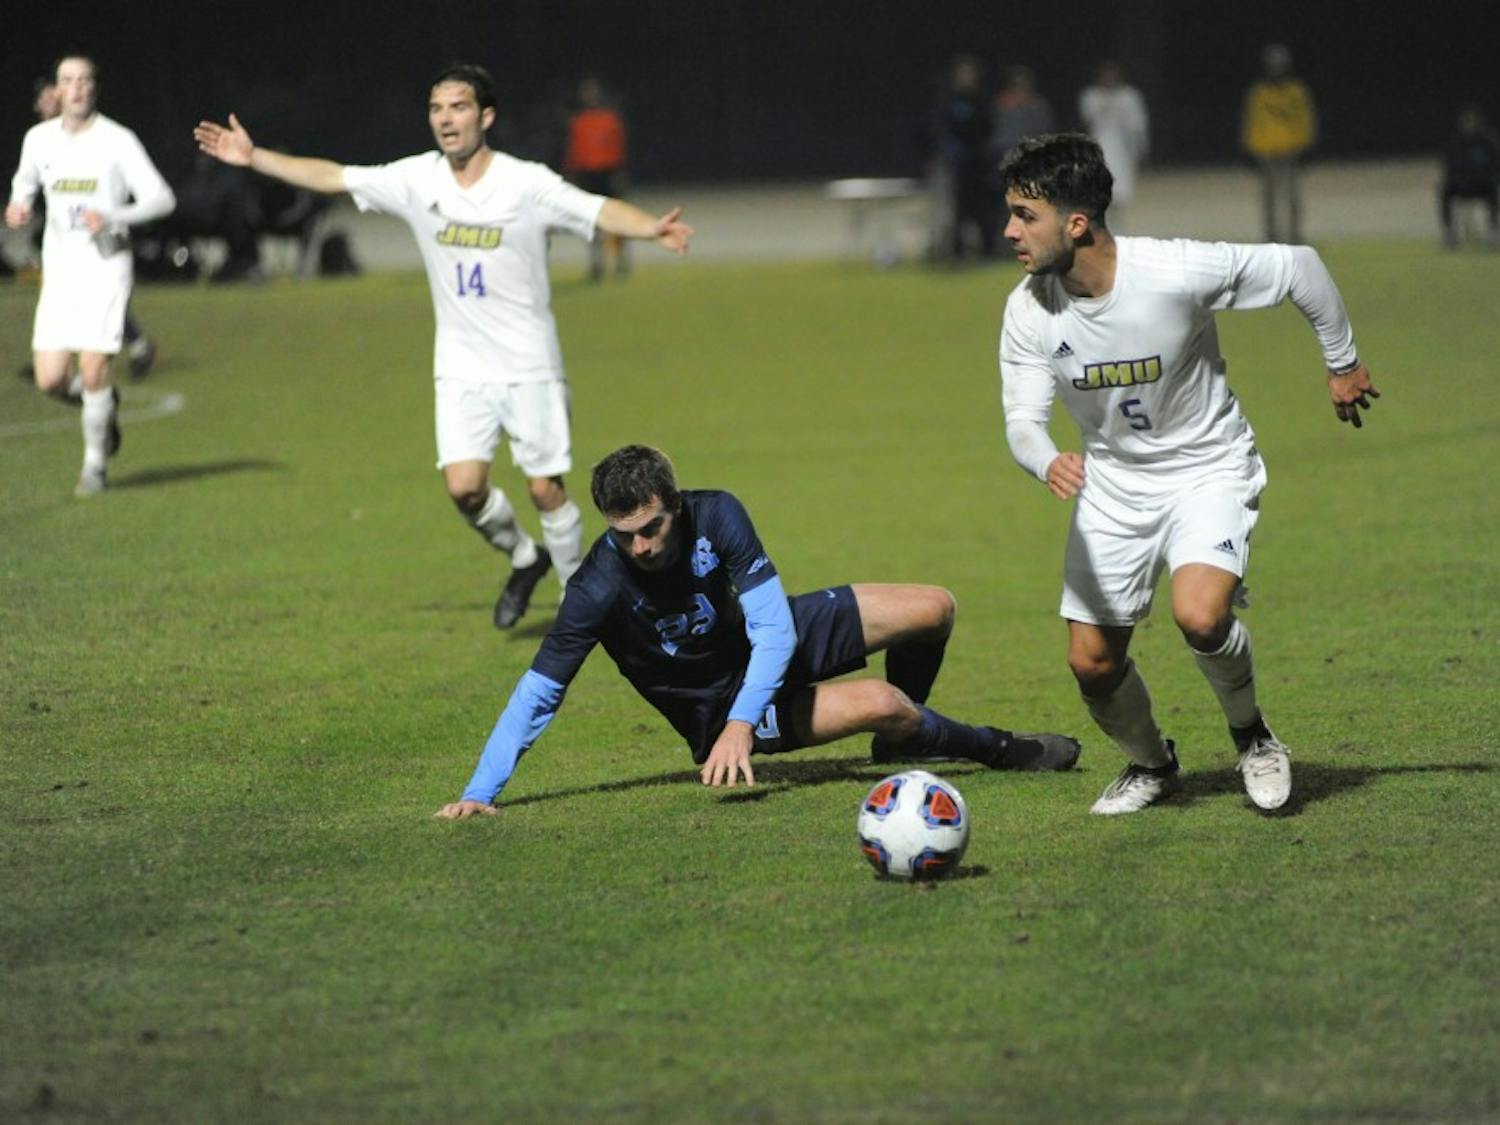 James Madison midfielder Niclas Mohr (5) dribbles past midfielder Jeremy Kelly (29) during Sunday's NCAA tournament game vs. James Madison. The Tar Heels lost 2-1.